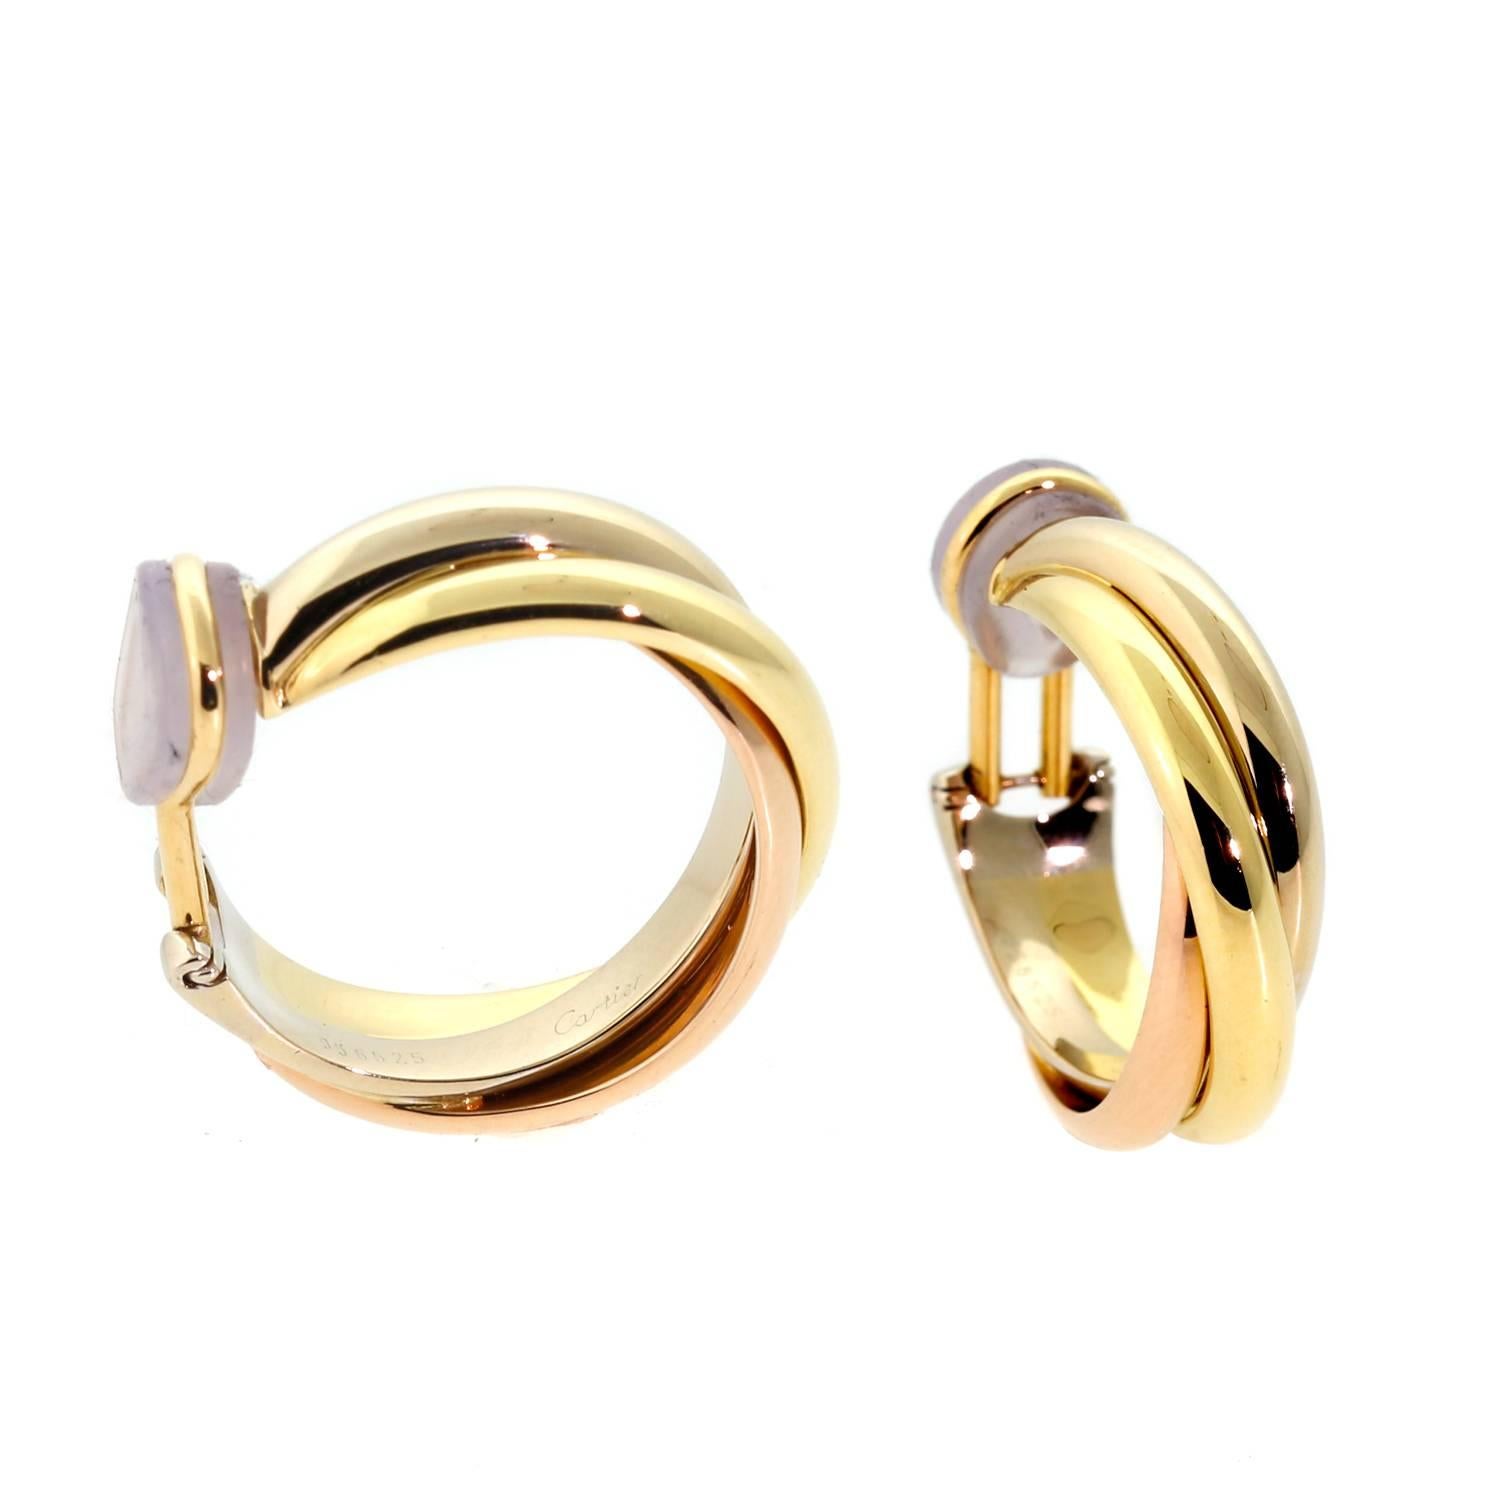 An iconic pair of authentic Cartier Trinity hoop earrings featuring 18k white yellow and rose gold. The earrings have a width.27